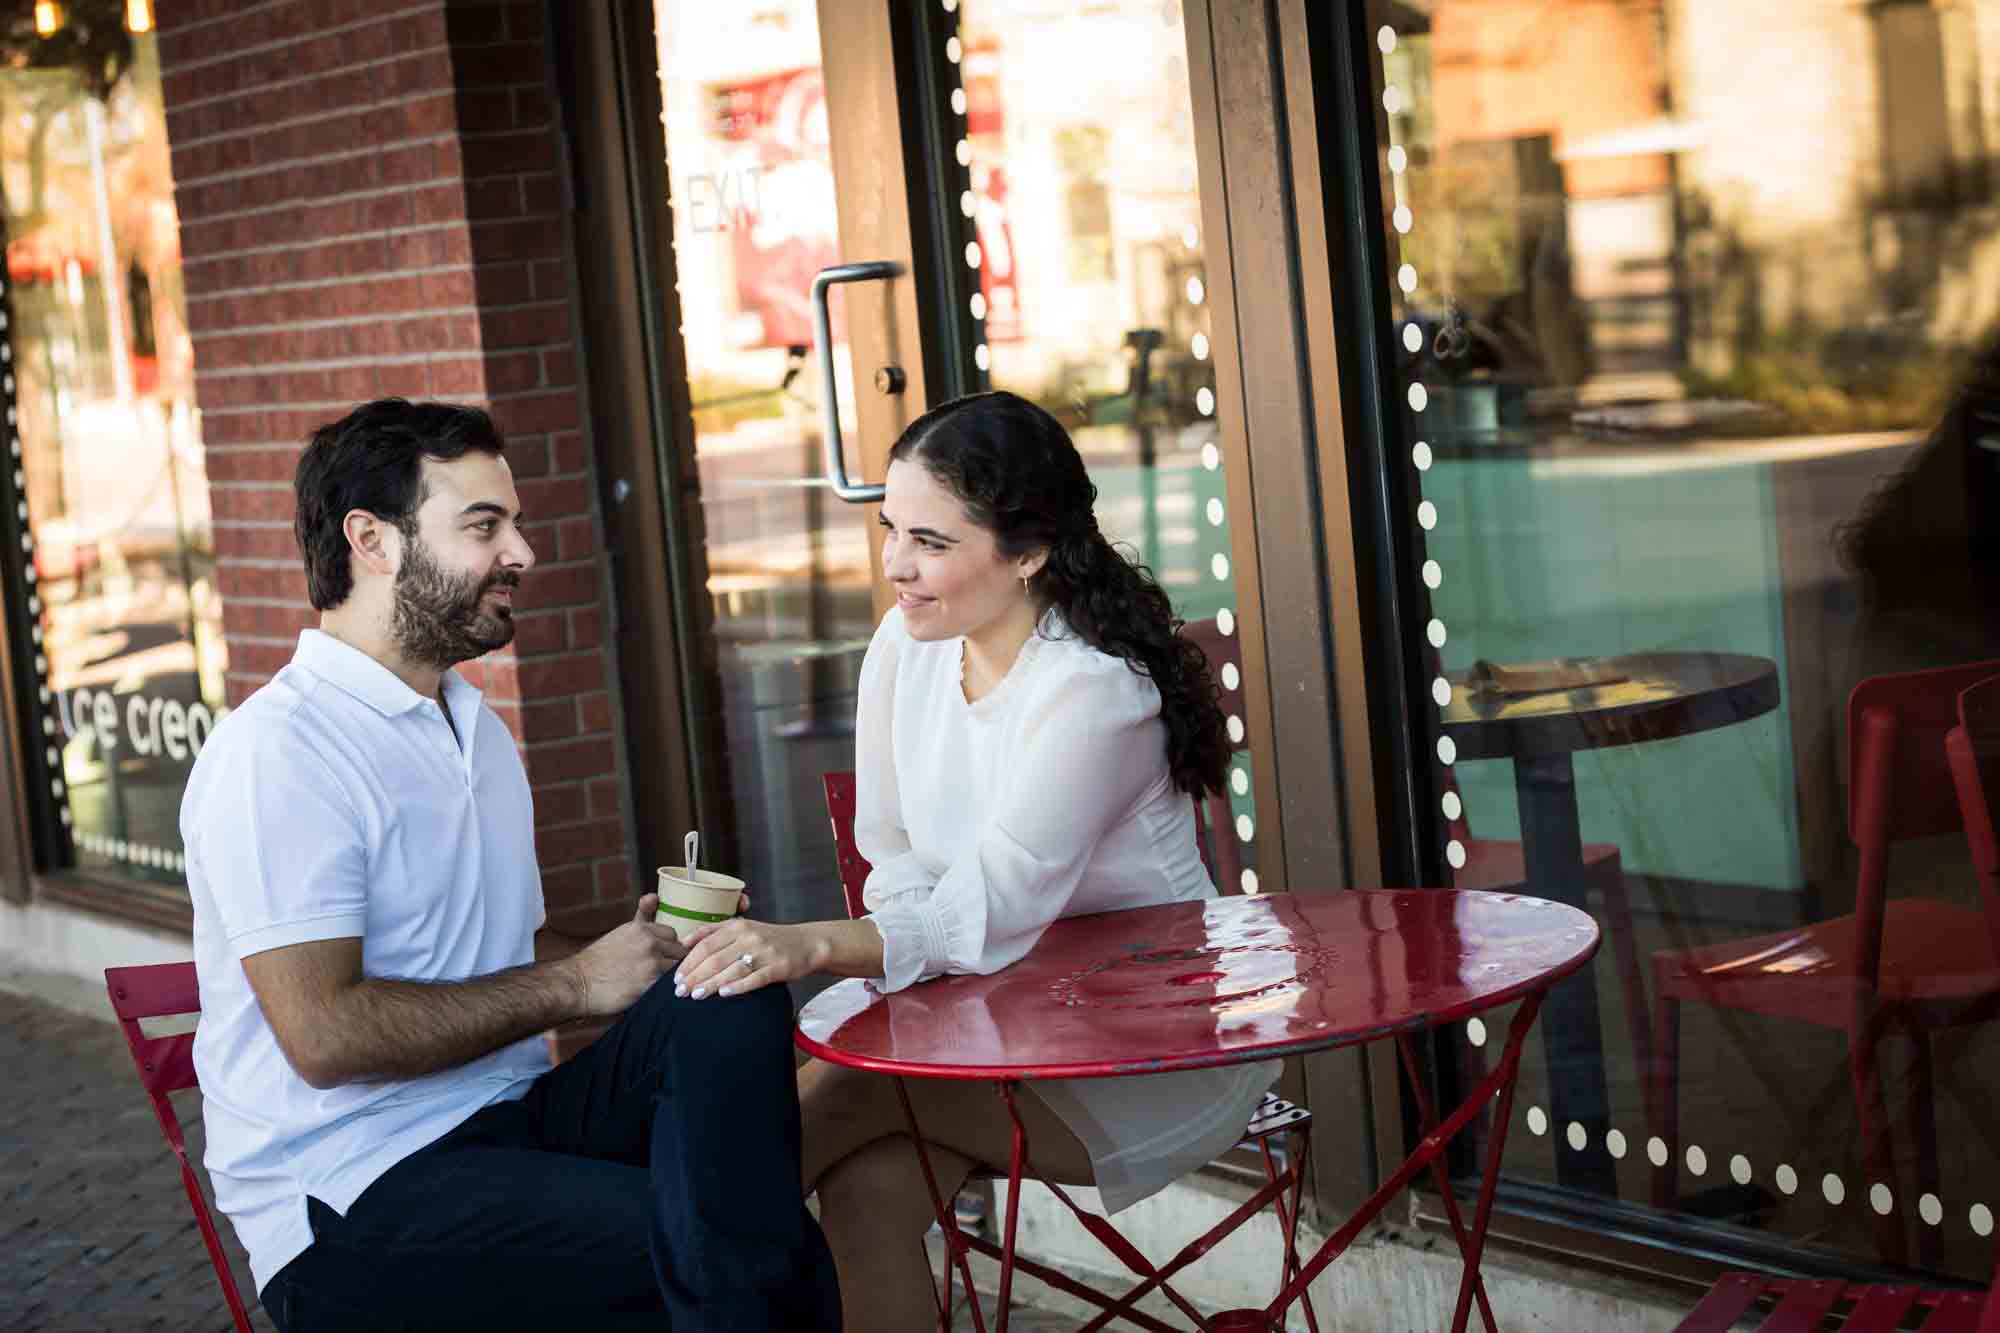 Couple looking at each other while sitting at red table during a Pearl engagement portrait session